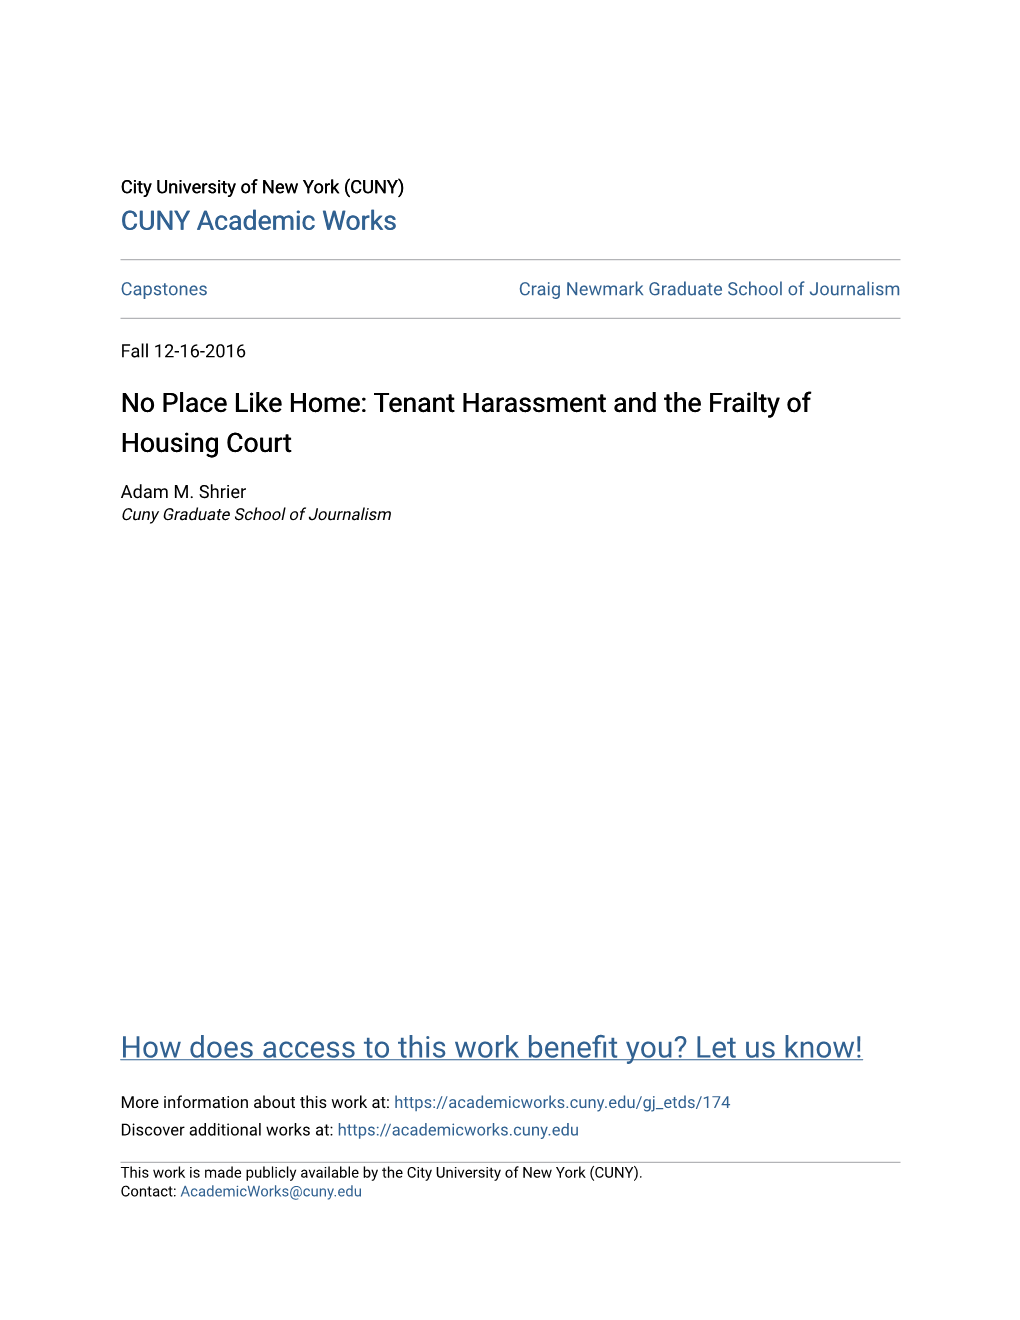 Tenant Harassment and the Frailty of Housing Court